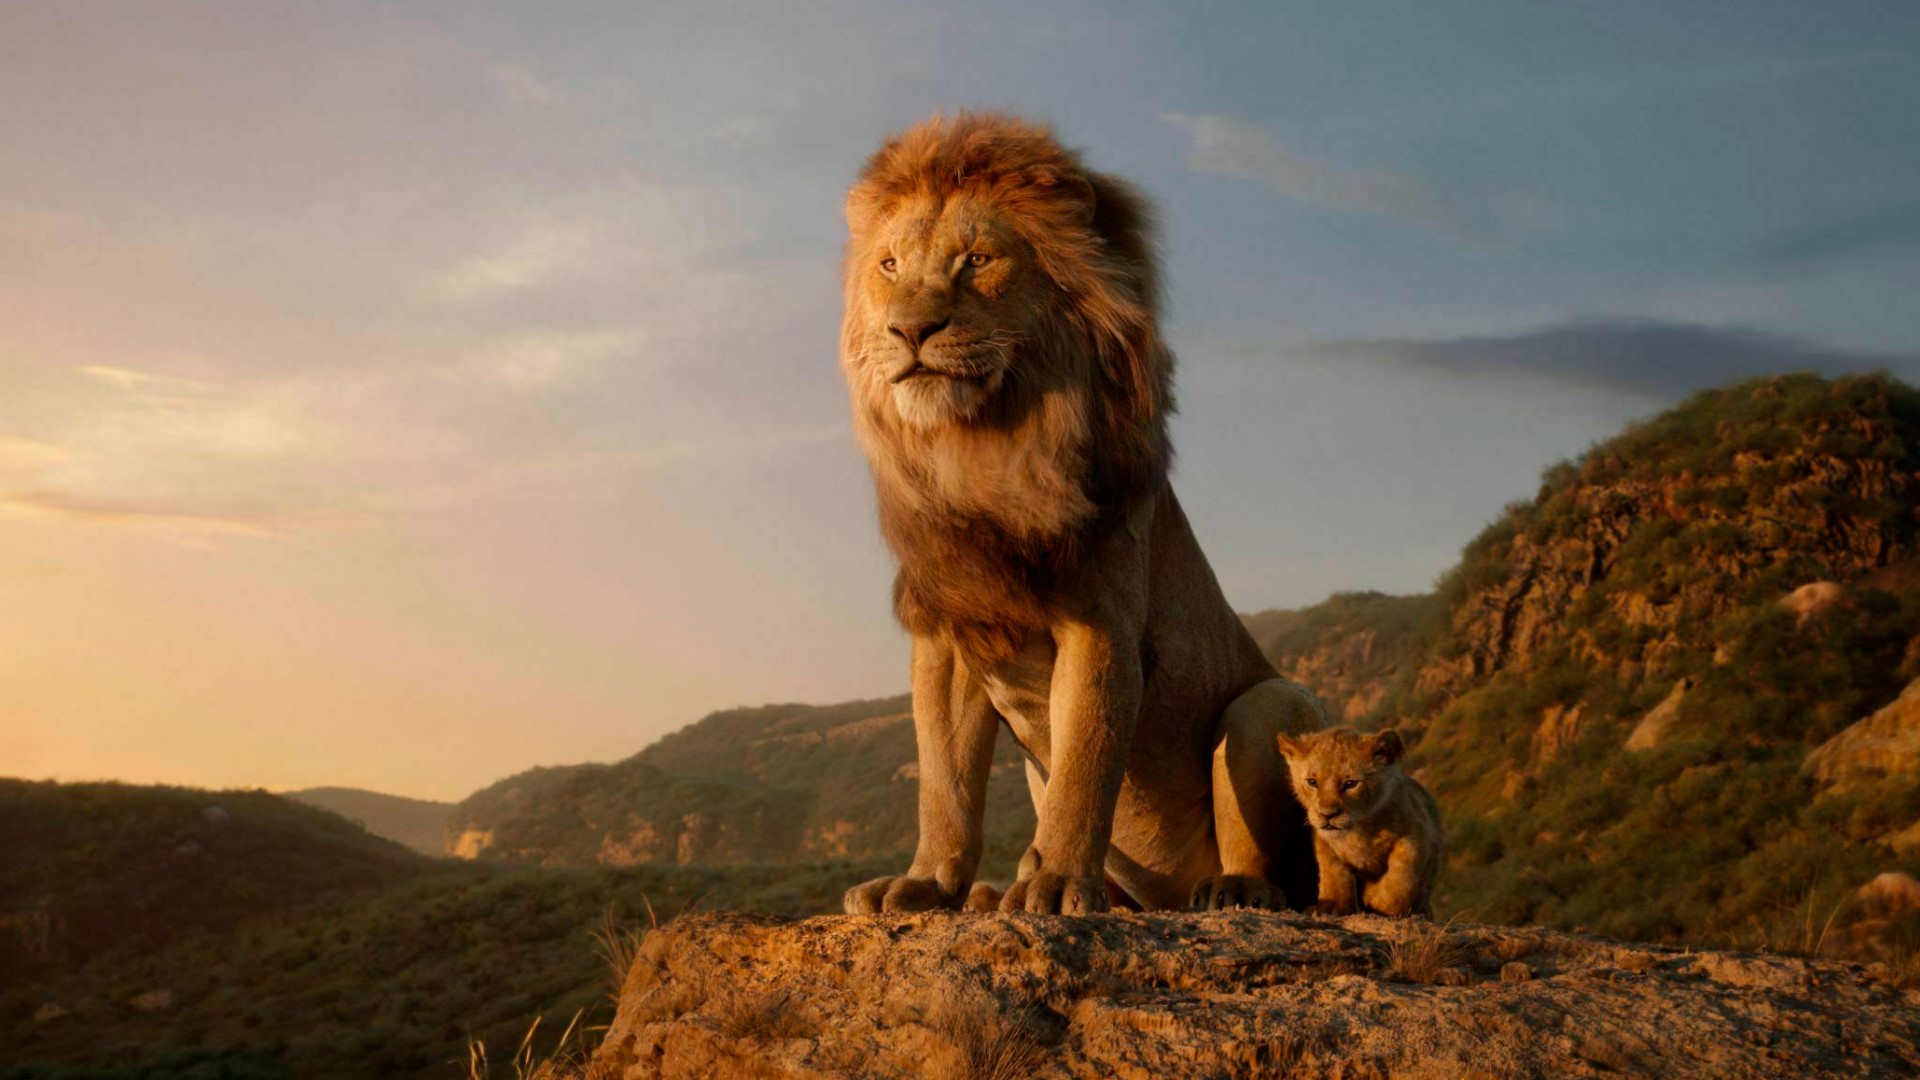 "The Lion King" drops Friday! How many stars will  Director Shawn Hobbs give it?